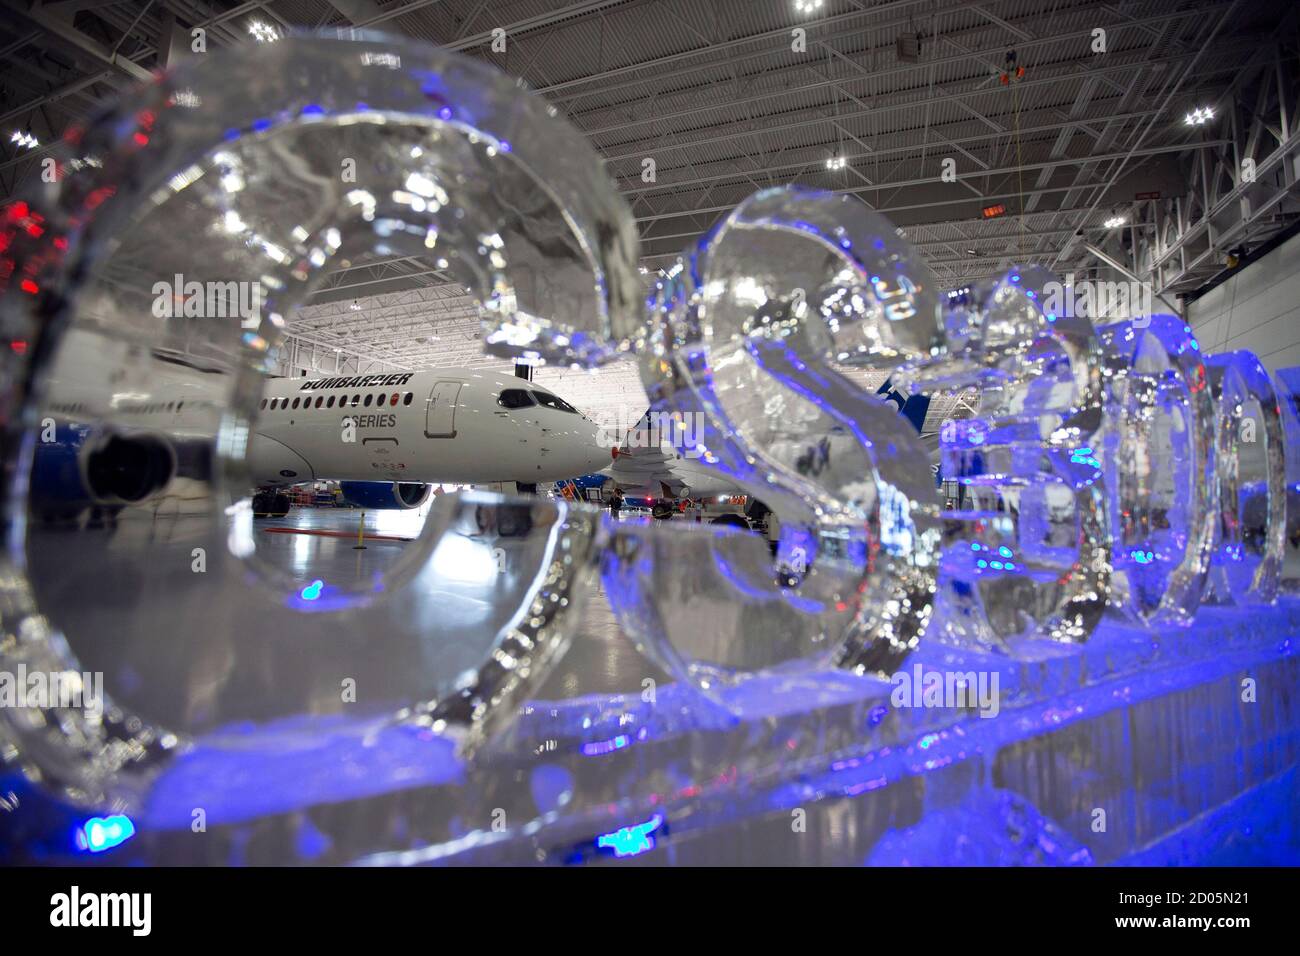 The Bombardier CS300 Aircraft is photographed through an ice sculpture prior to its' test flight in Mirabel February 27, 2015. Bombardier Inc confirmed on Thursday that it will begin long-delayed flight testing on Friday on the CS300 - the larger version of its new CSeries narrow-body jet. REUTERS/Christinne Muschi (CANADA - Tags: TRANSPORT BUSINESS) Stock Photo